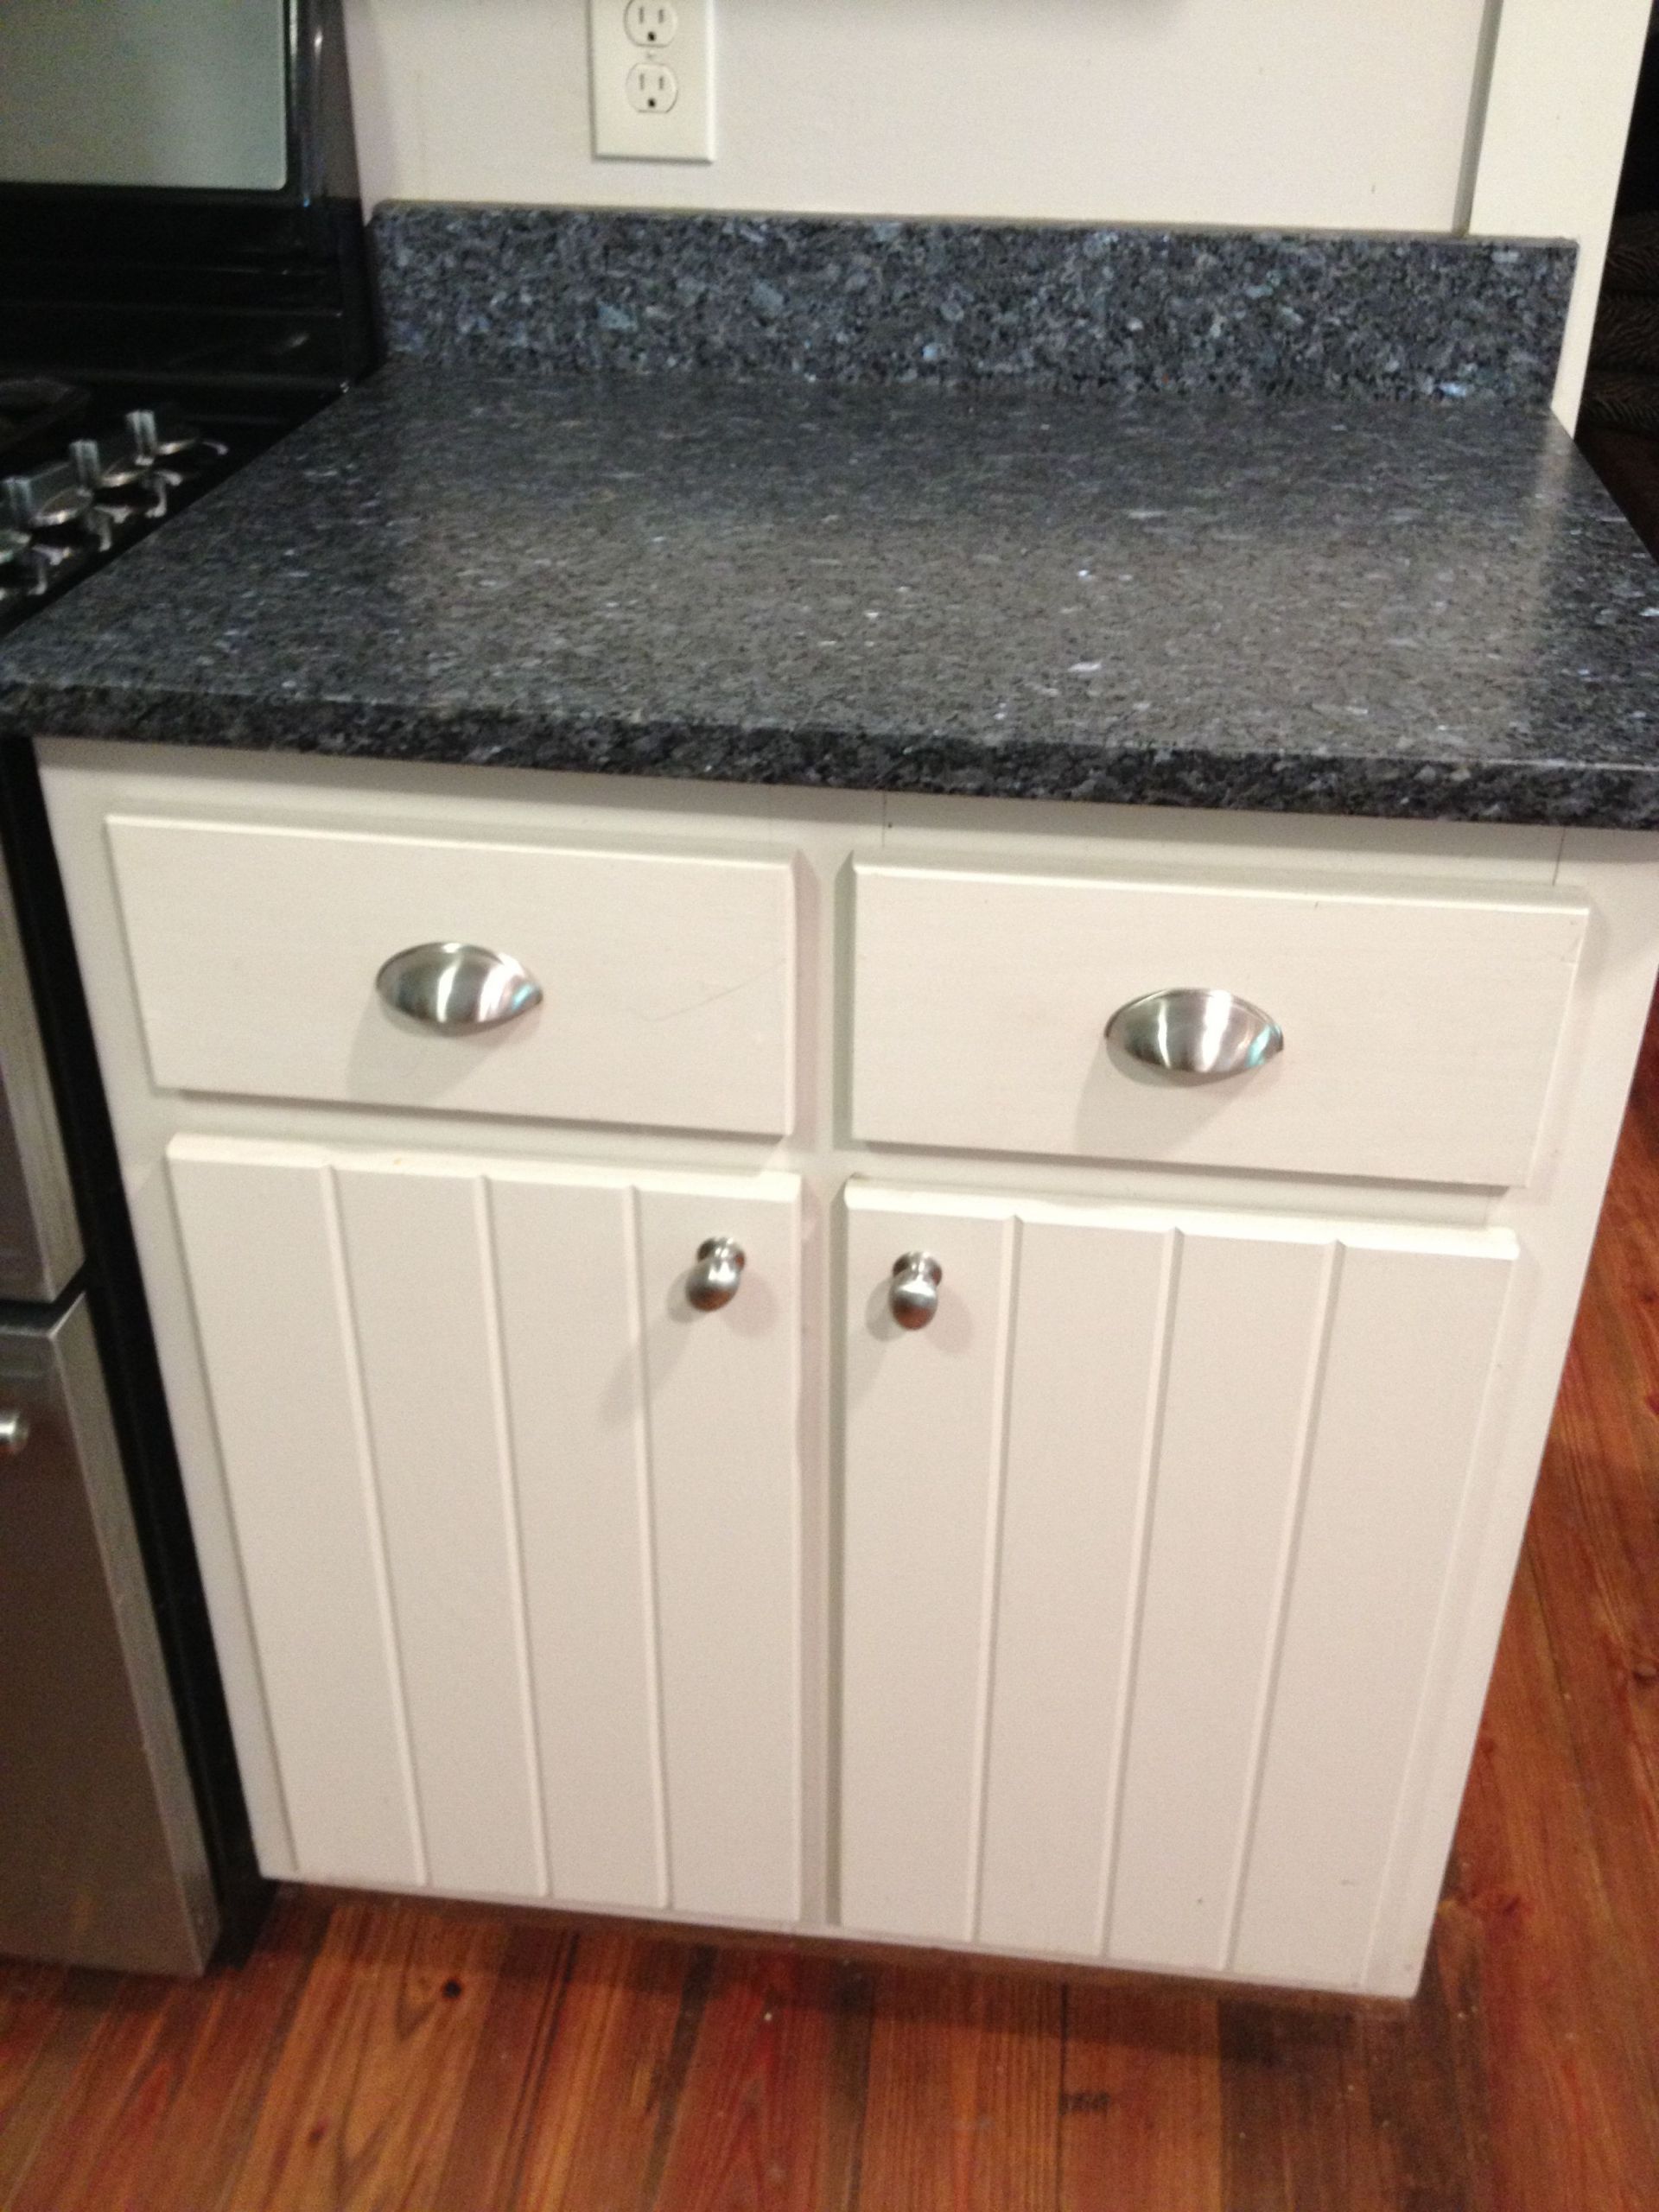 Lowes Kitchen Cabinet Pulls
 Kitchen cabinets Pulls from lowes Kitchen